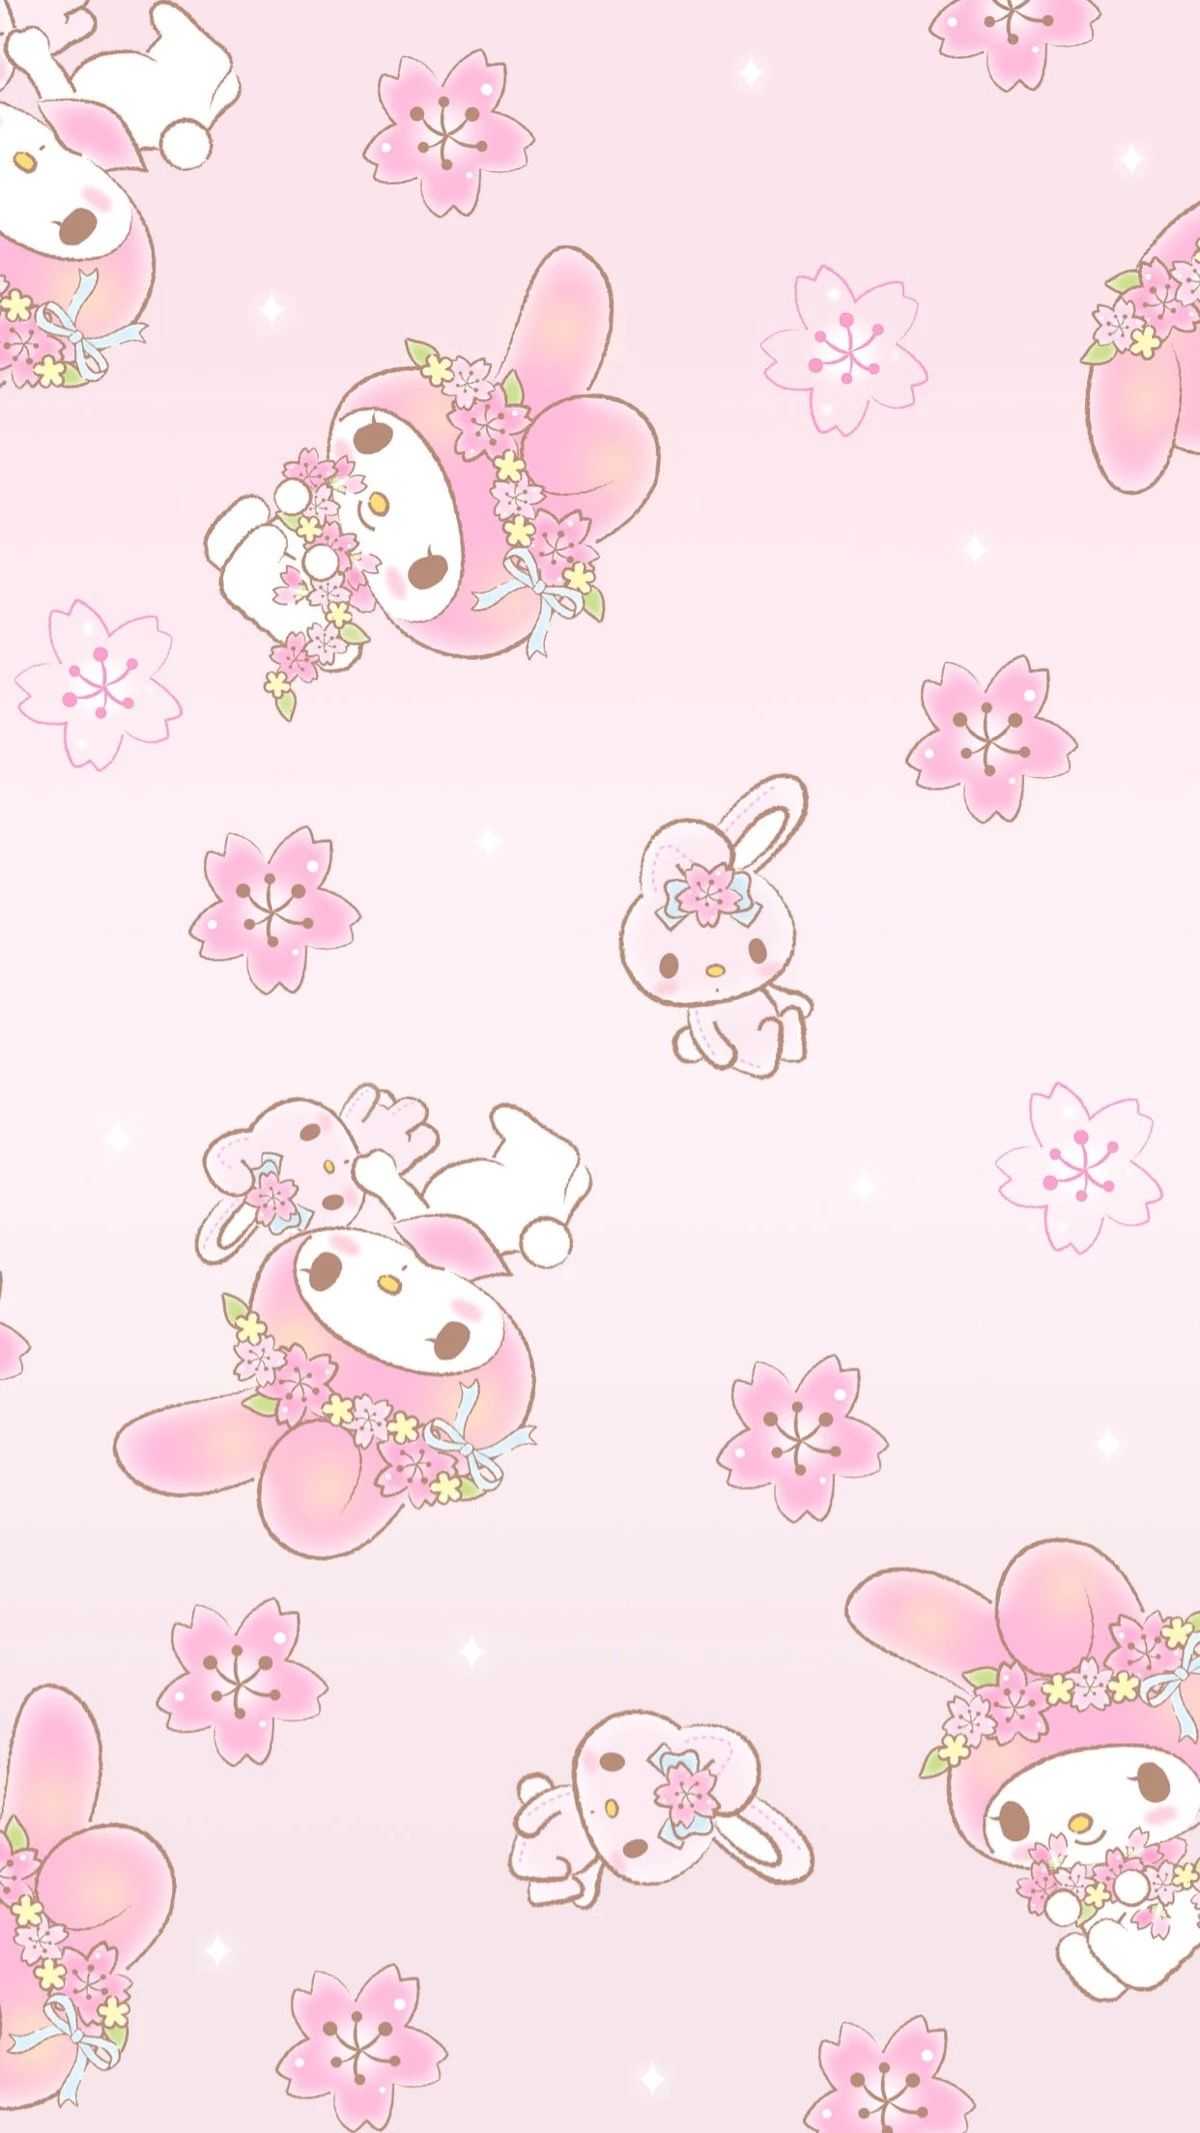 A cute hello kitty pattern with flowers and bunnies - Sanrio